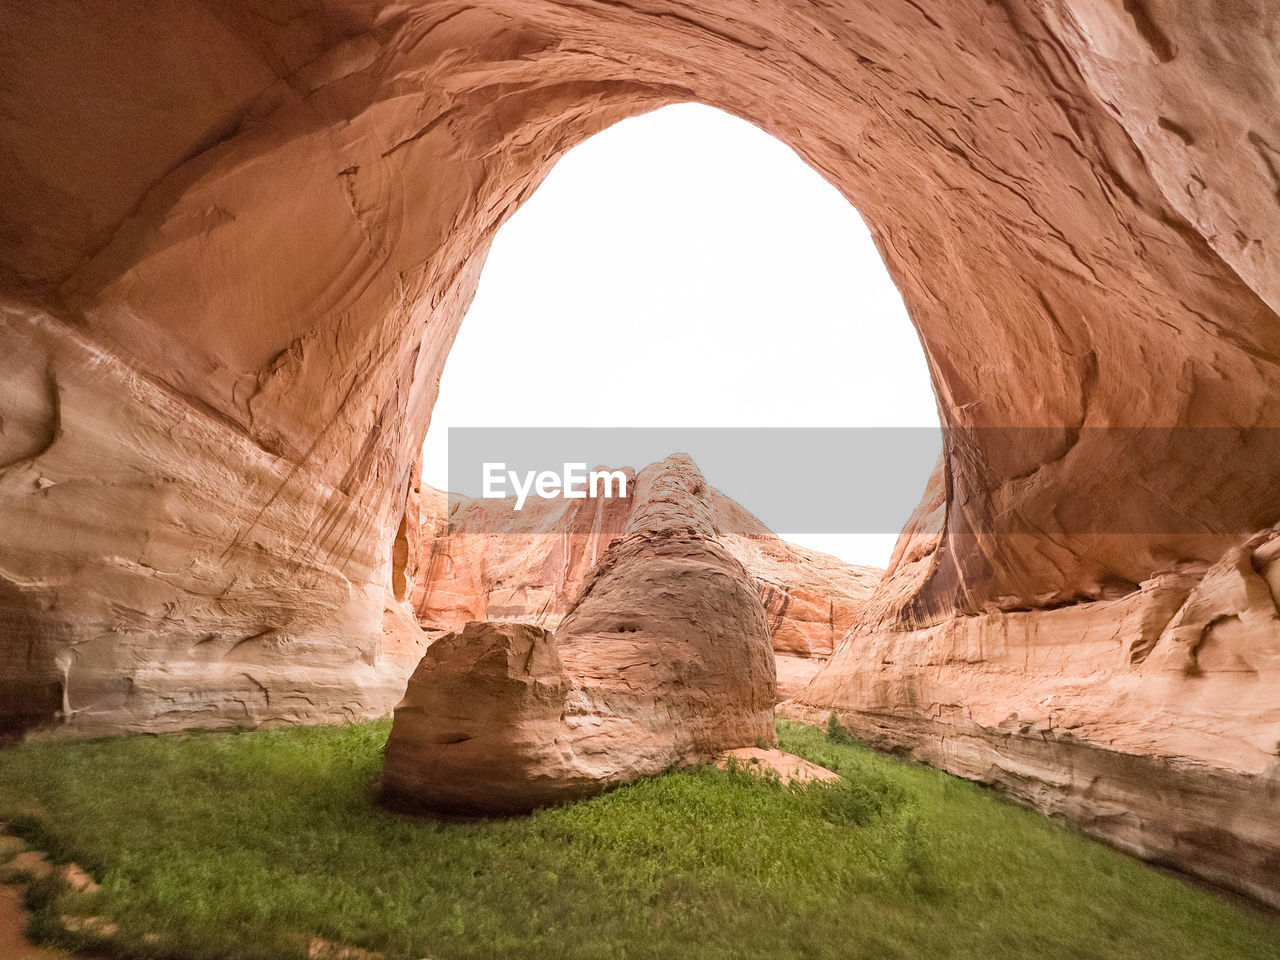 Rock cliff outcropping in lush desert cave with vegetation